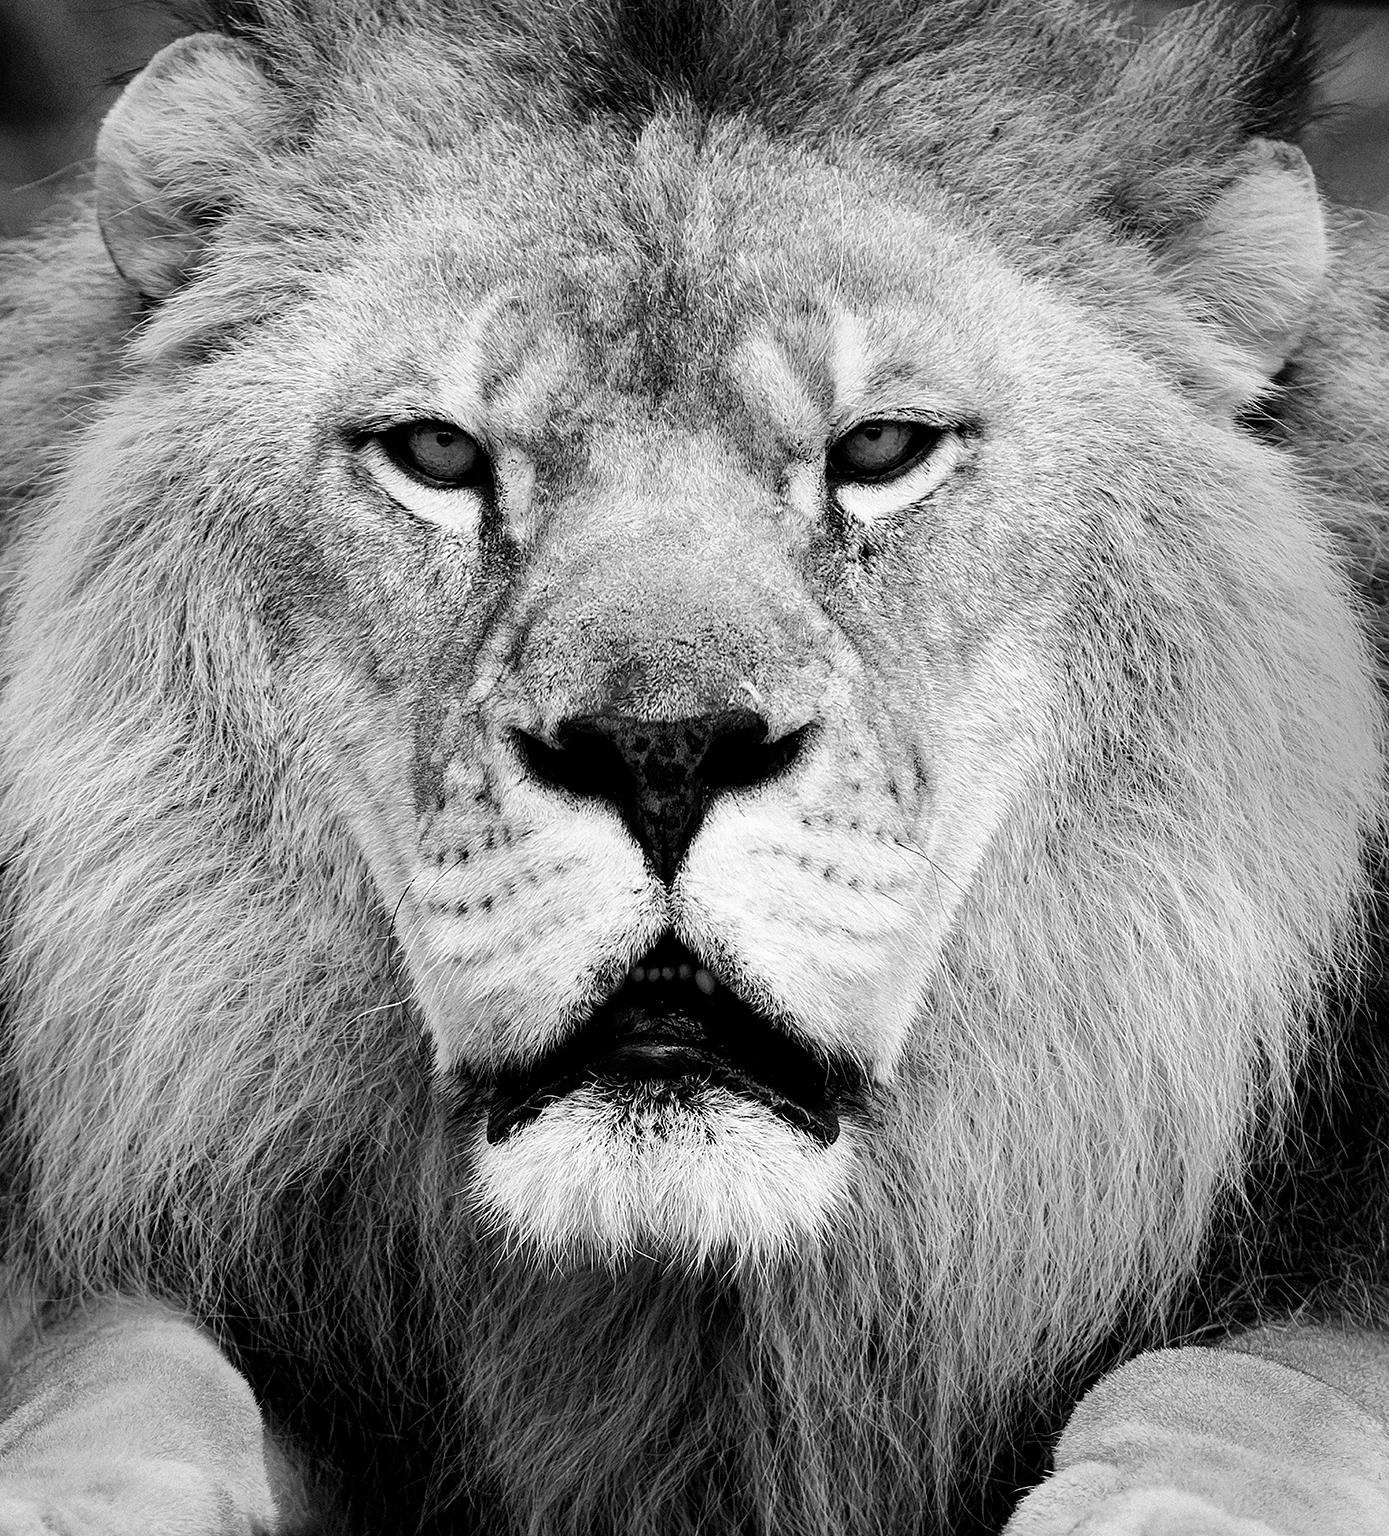 Shane Russeck Animal Print - "Face Off"  - Black & White Photography, Lion Photograph Unsigned Test Print